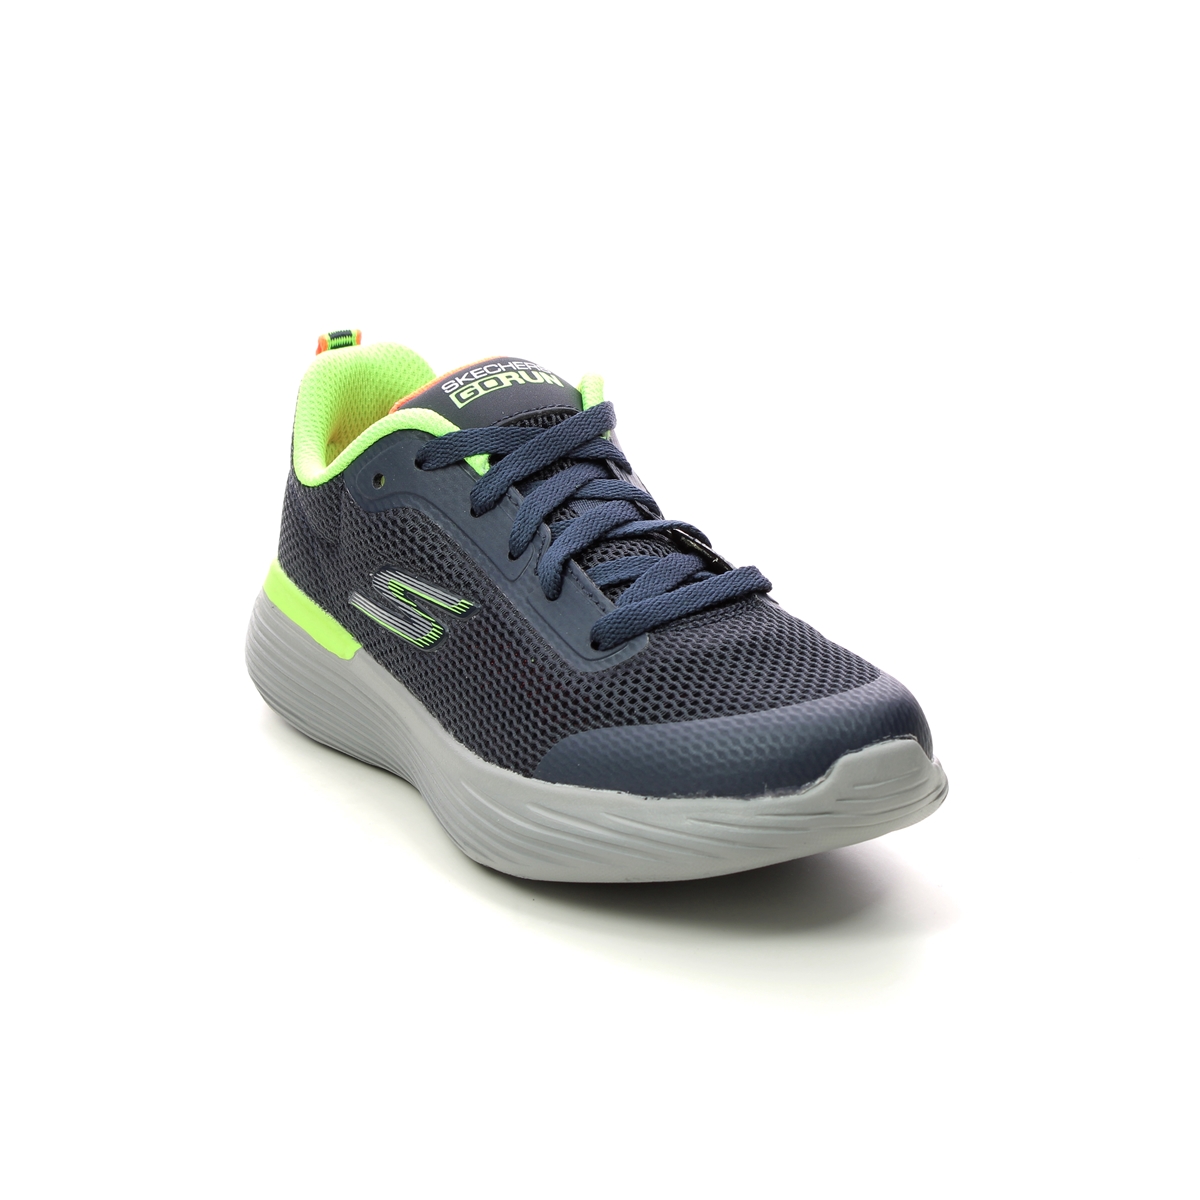 Skechers Go Run 400 Lace NVLM Navy Lime Kids trainers 405100L in a Plain Textile in Size 35